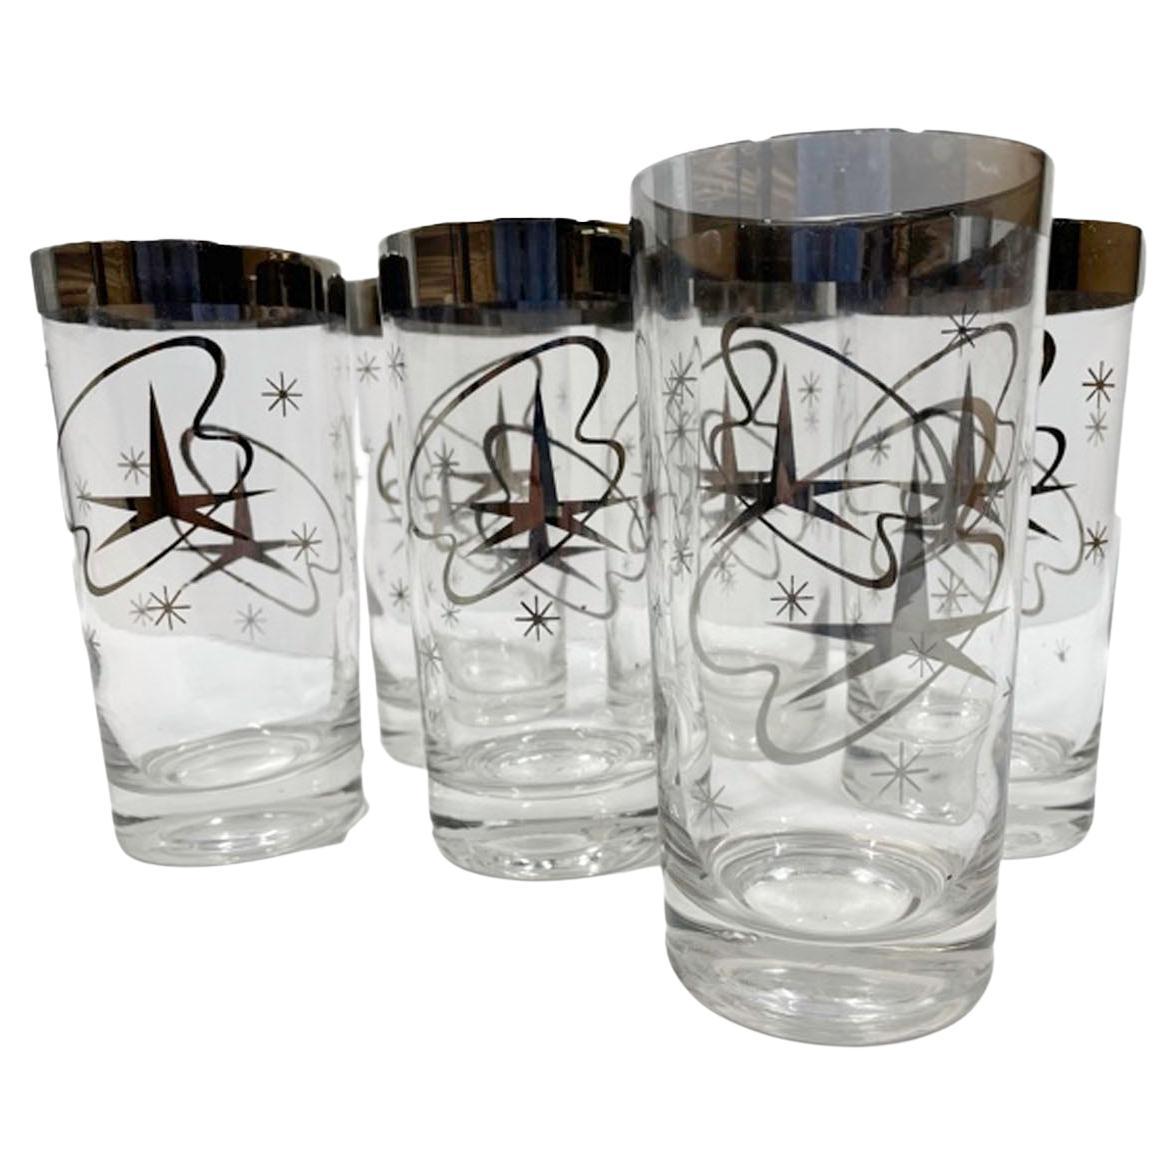 Vintage Atomic Highball Glasses with Silver Star and Streamer Design For Sale